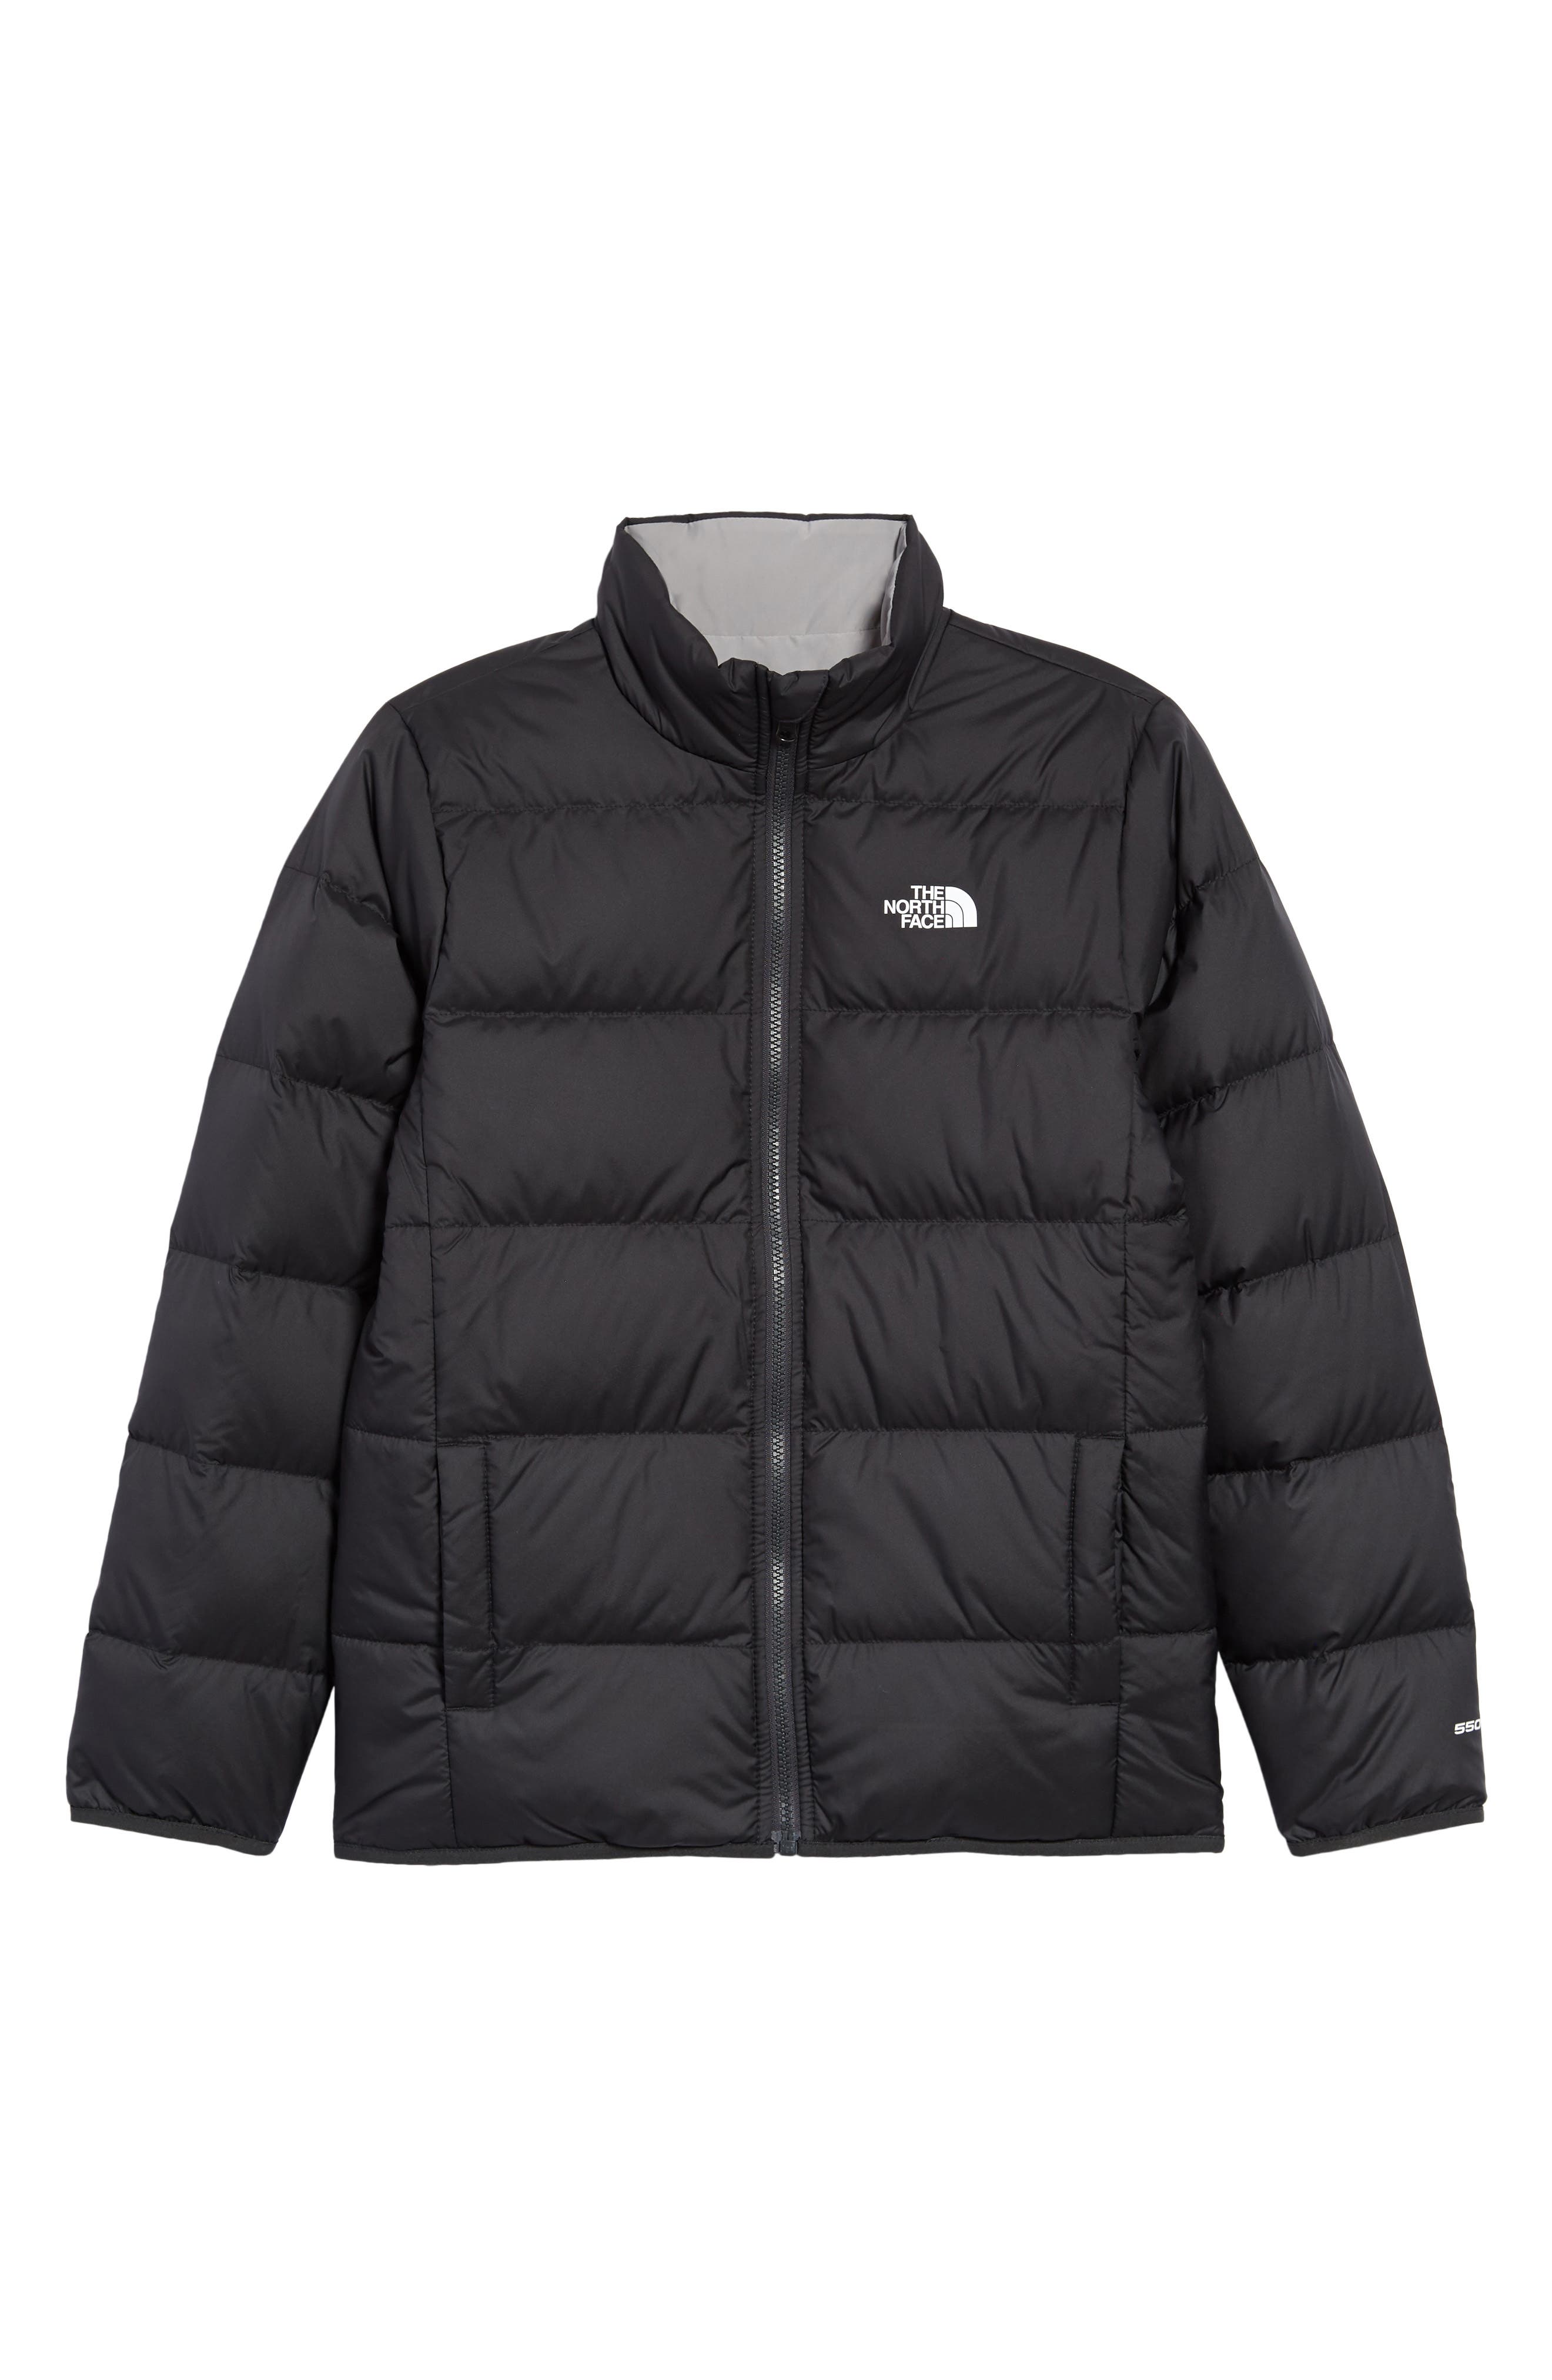 Boys' The North Face Clothes (Sizes 8 